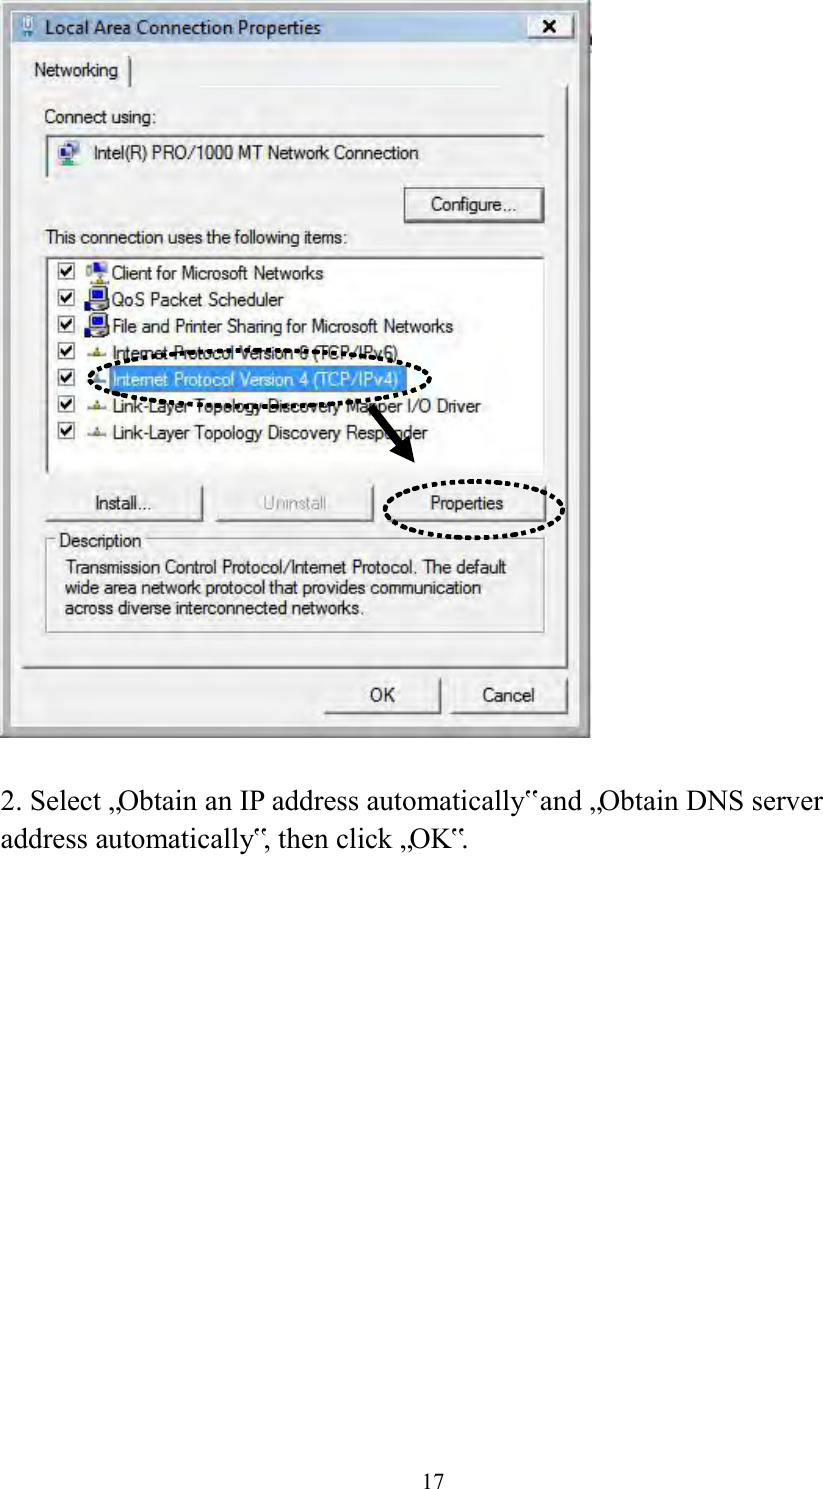  17   2. Select „Obtain an IP address automatically‟ and „Obtain DNS server address automatically‟, then click „OK‟.  